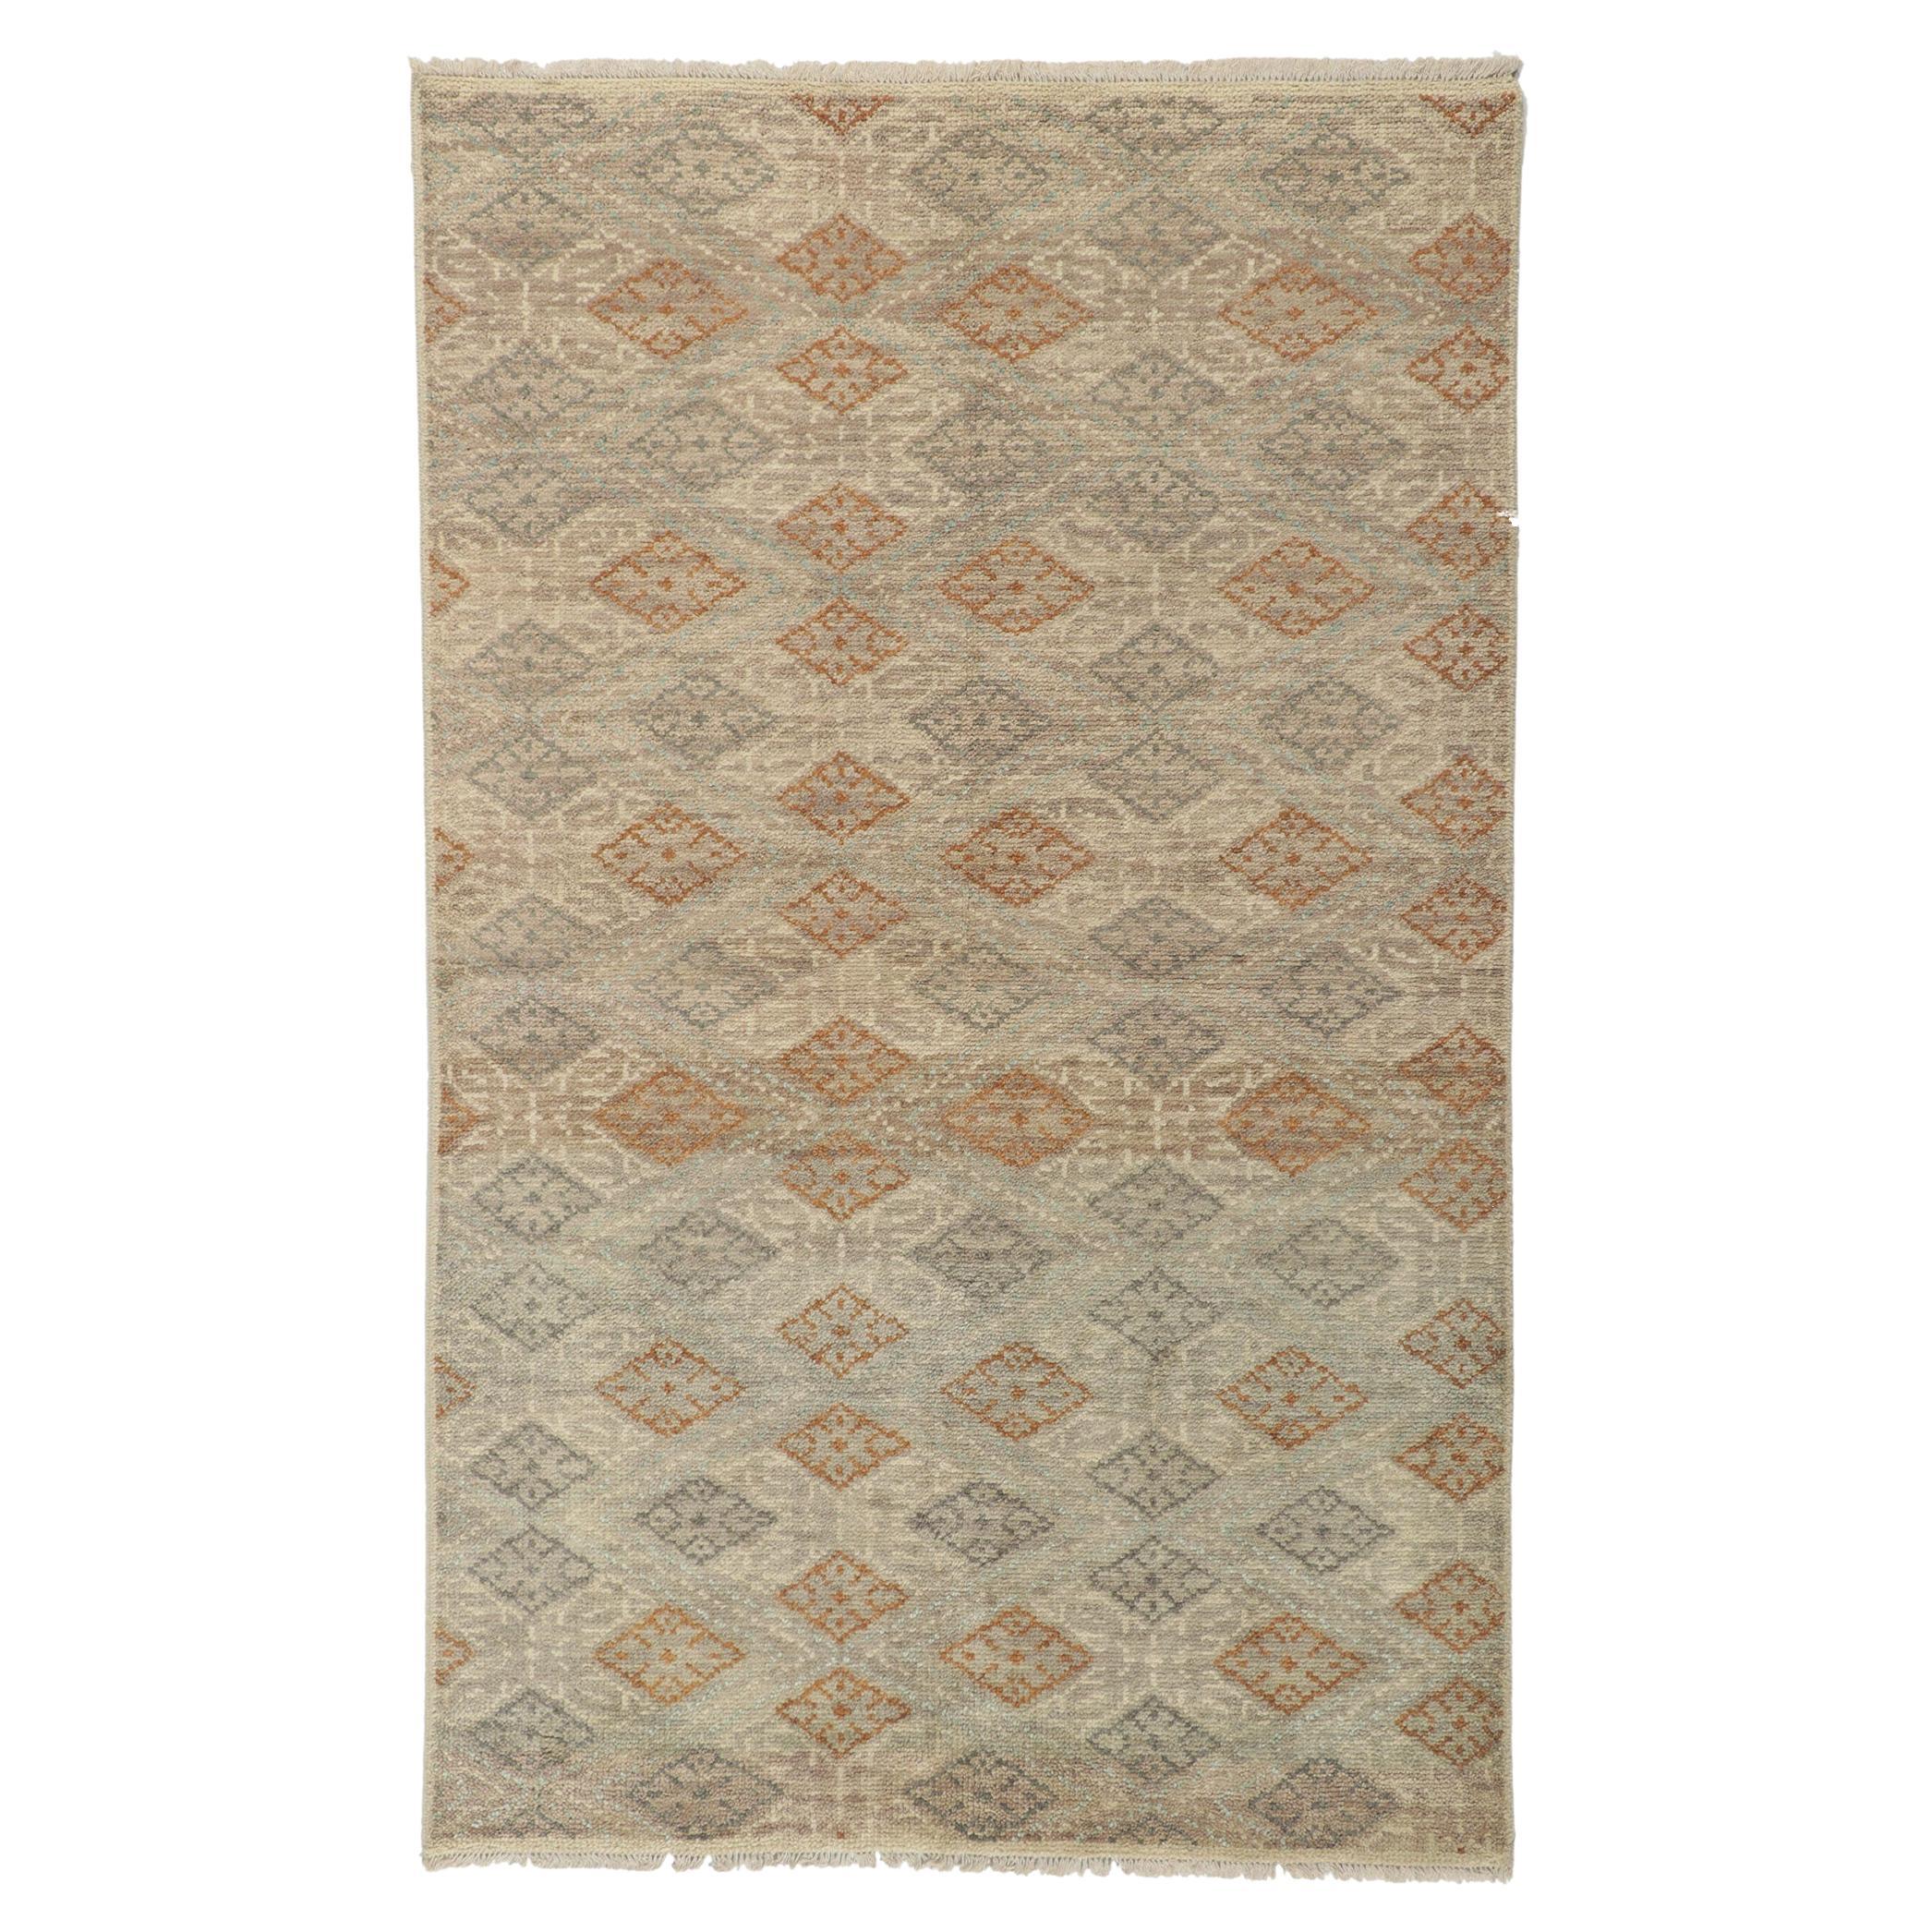 New Rustic Earth-Tone Transitional Area Rug with Modern Style For Sale